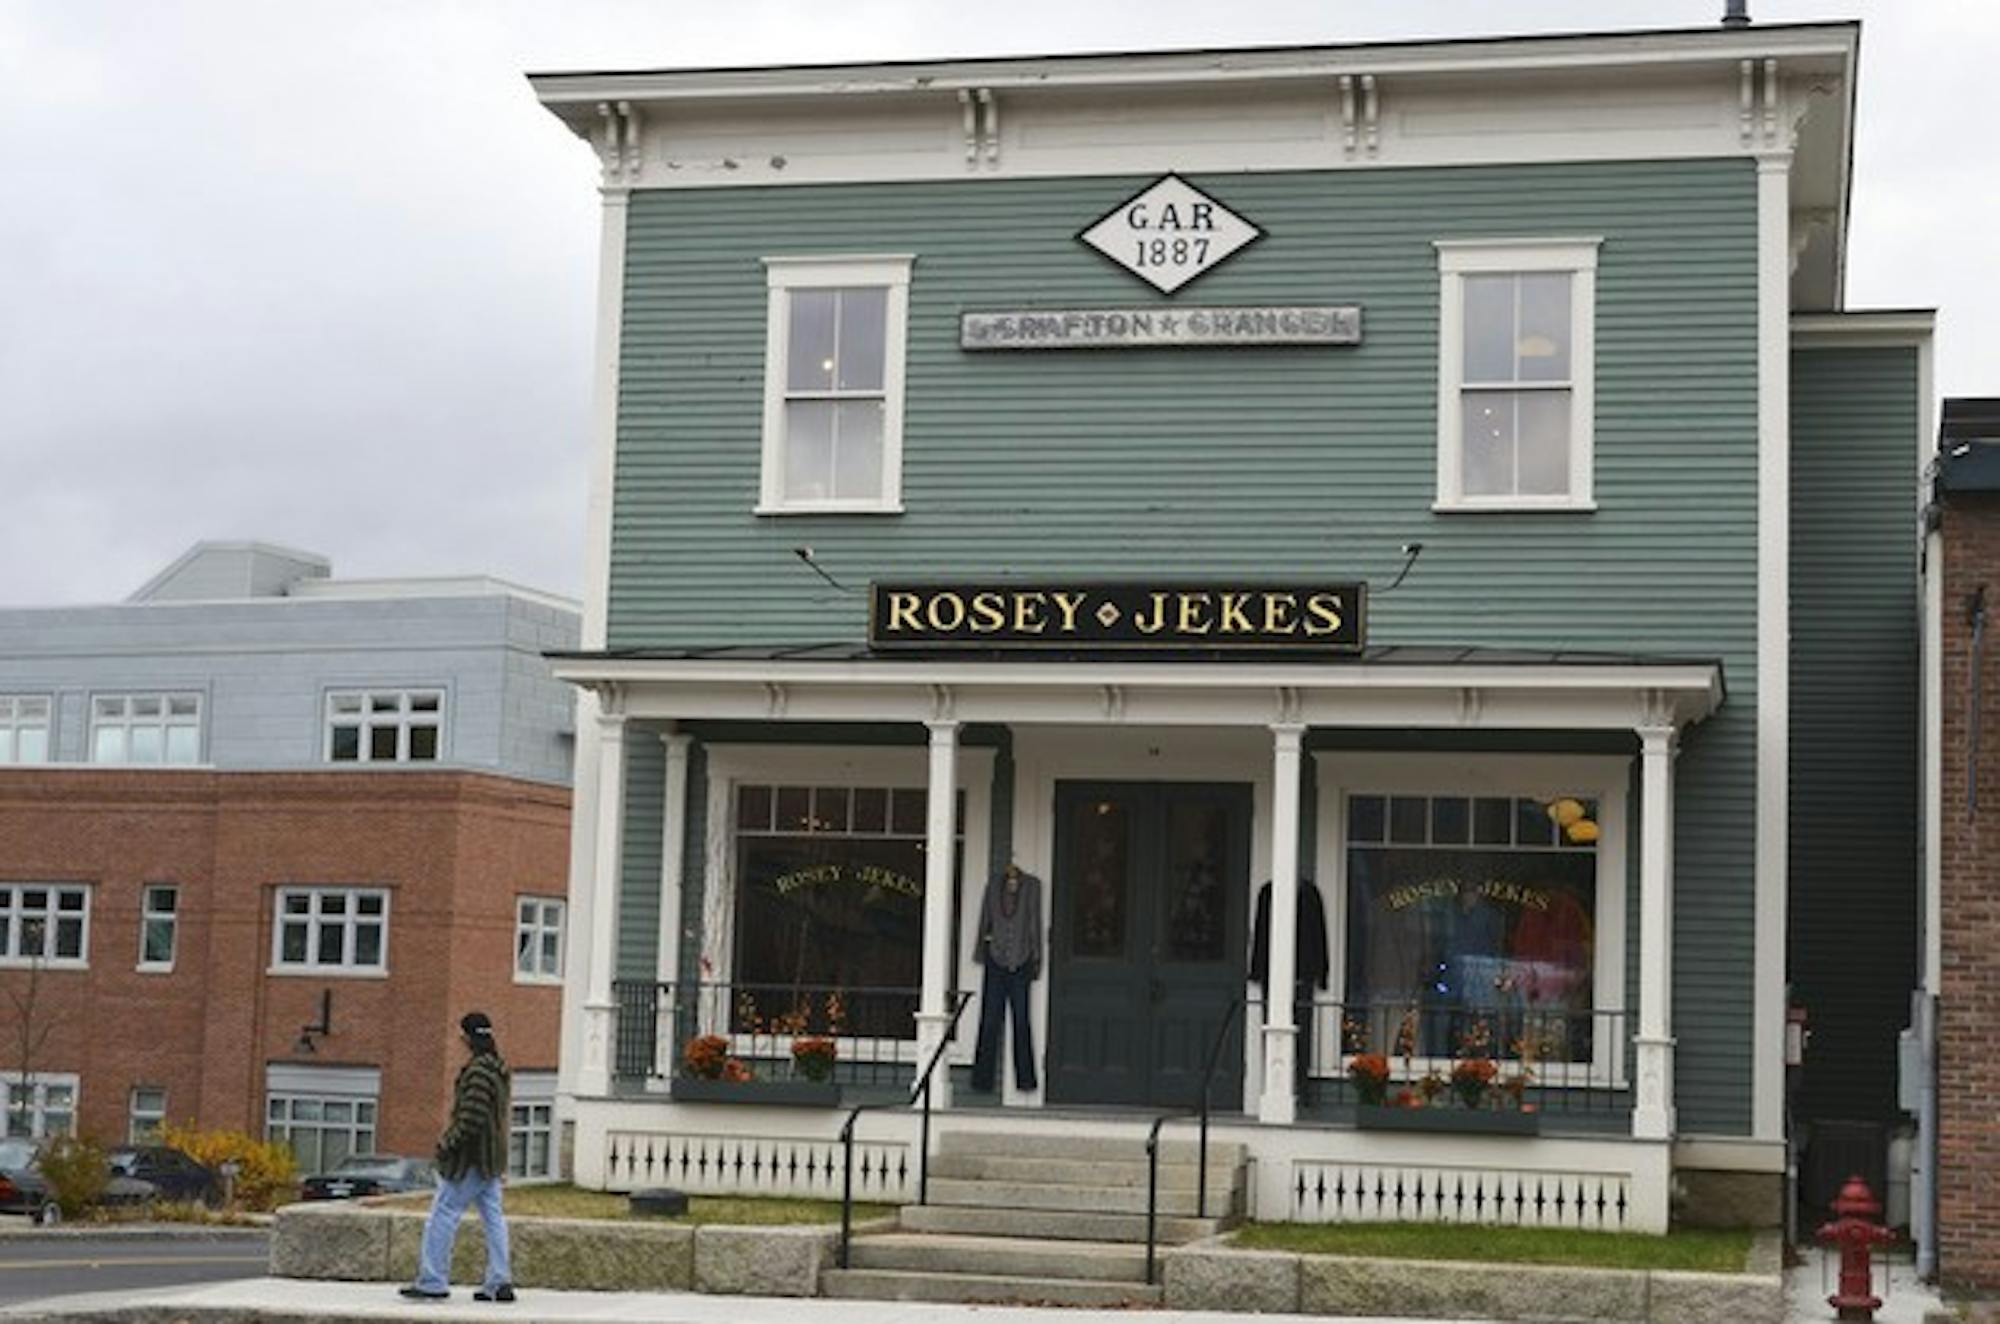 Motivated in part by an increasingly commercial atmosphere in Hanover, the Fabrikants plan to close Rosey Jekes clothing store and cafe in December.